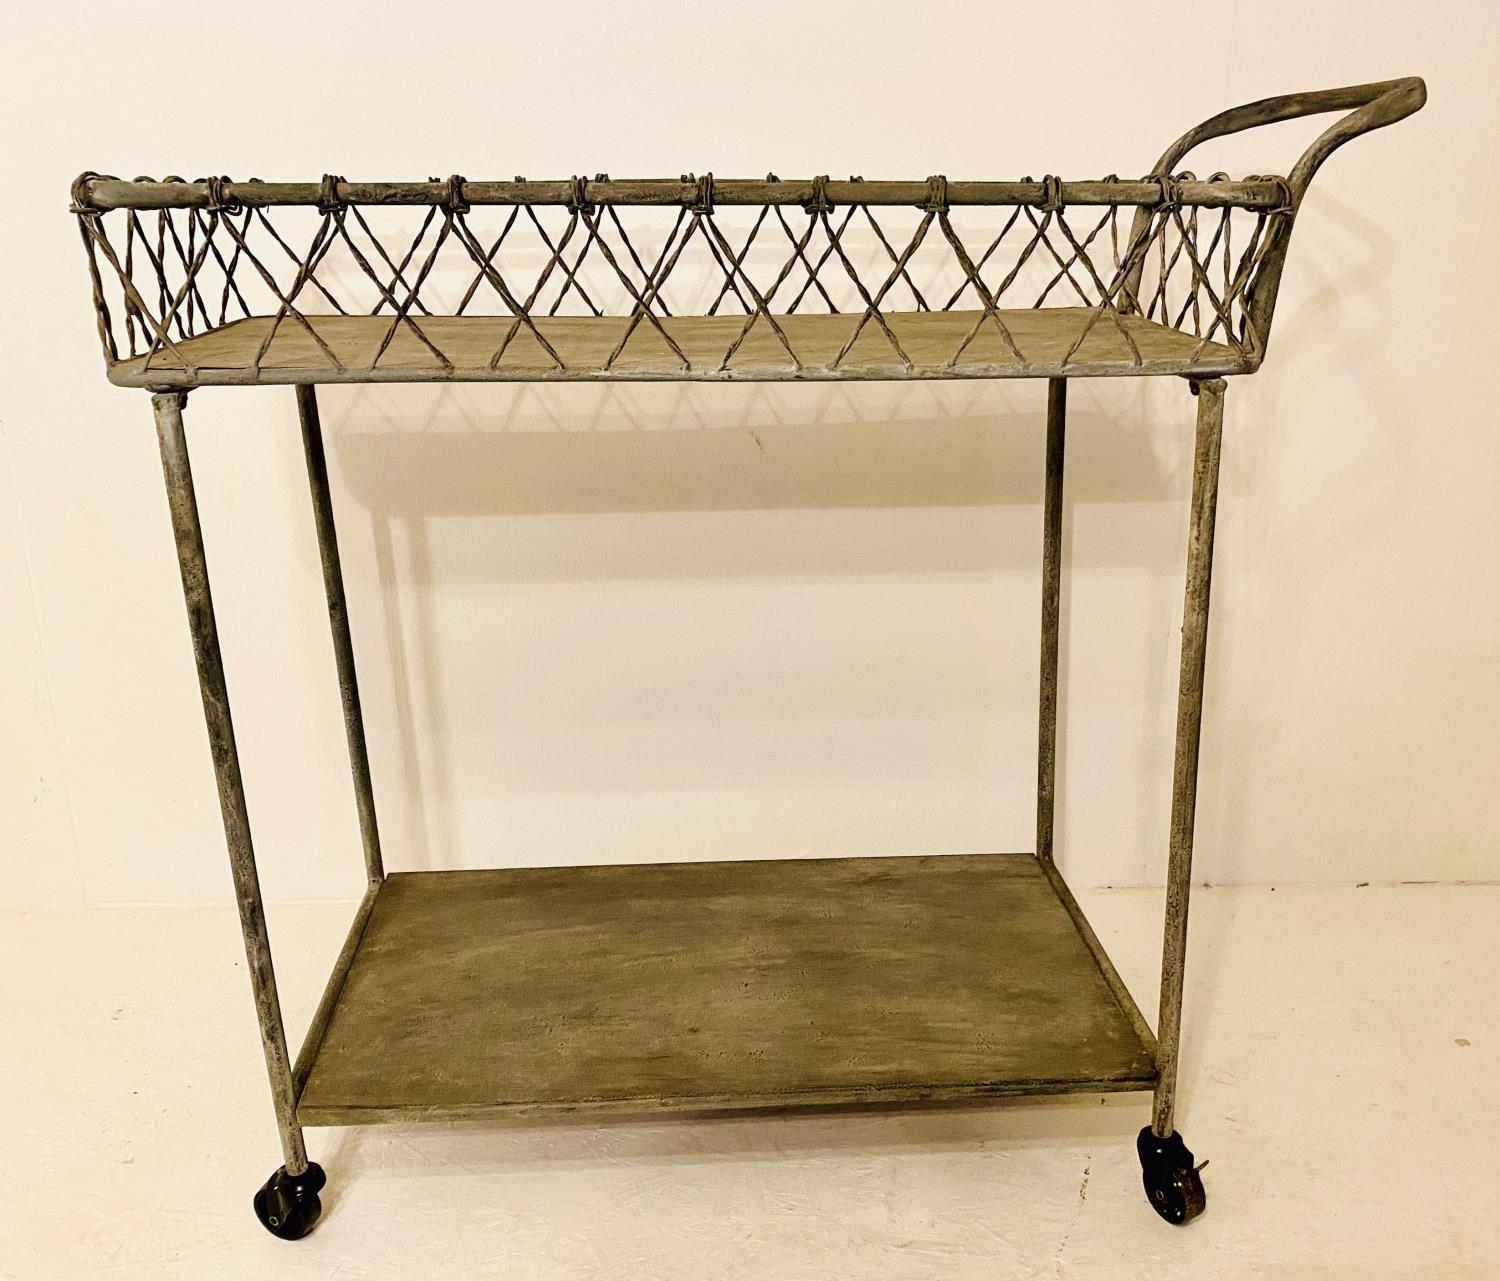 DRINKS TROLLEY, 1950s French style, aged painted finish, 85cm x 90cm x 38cm. - Image 5 of 5